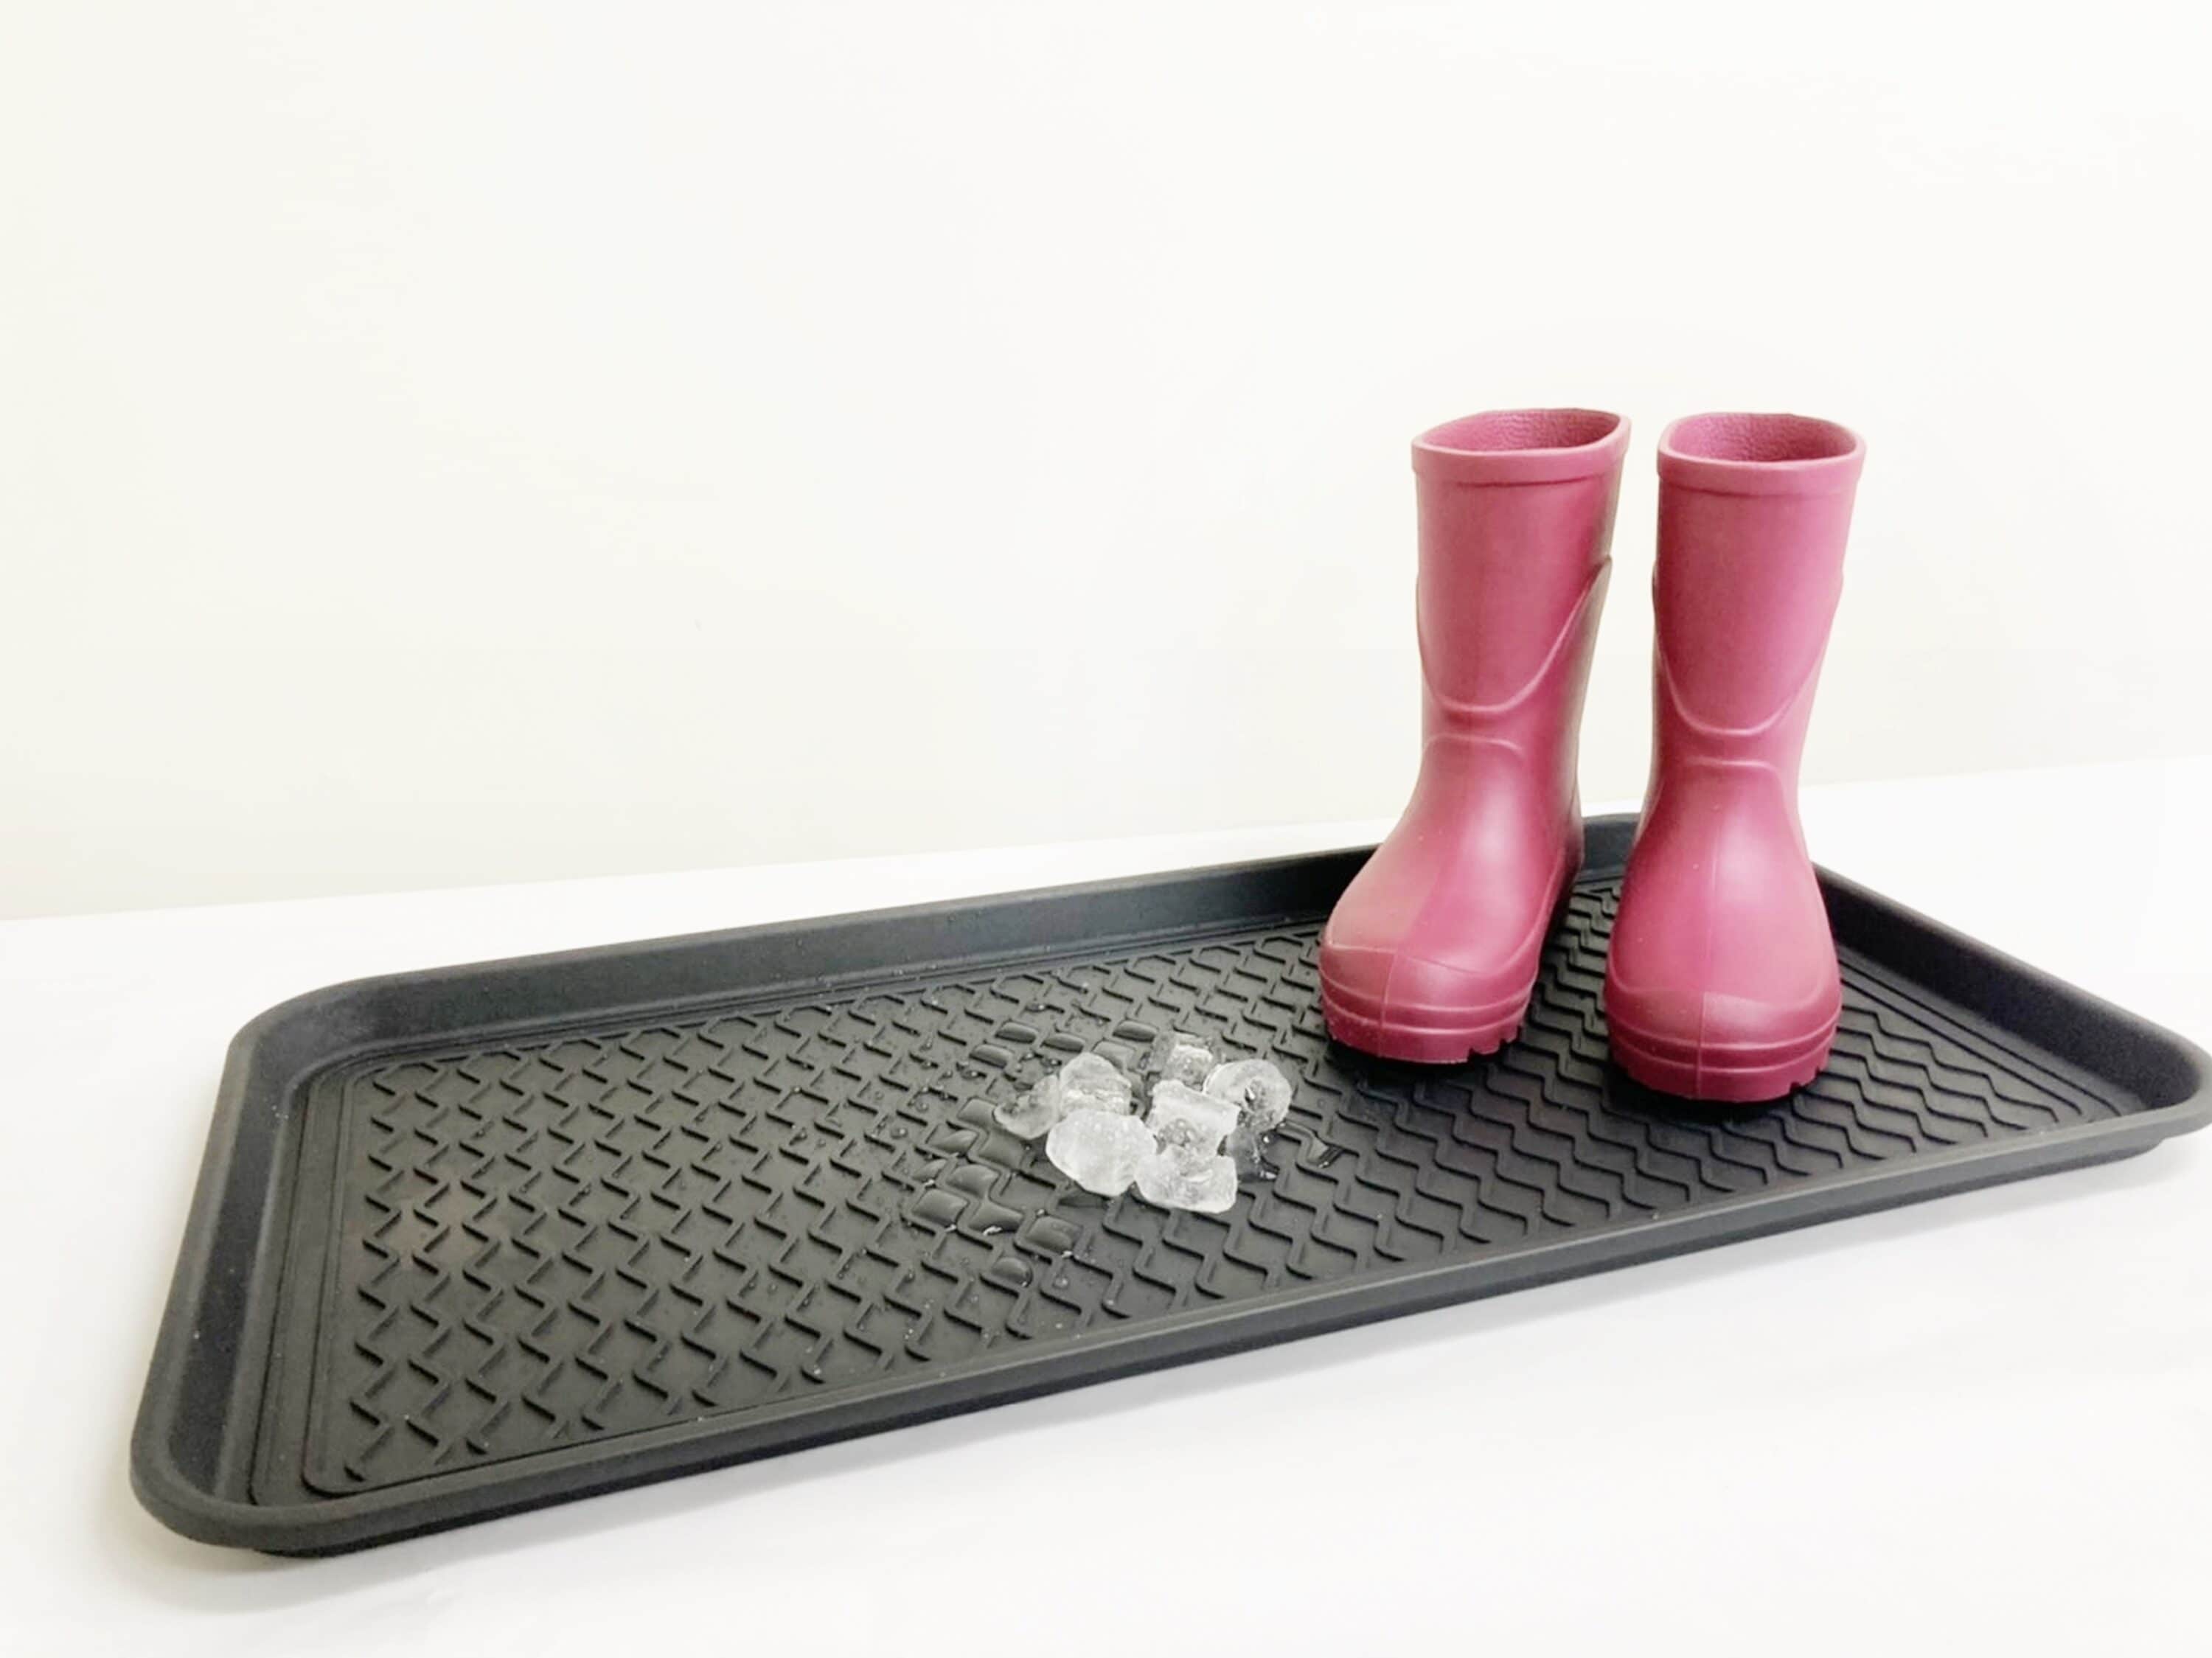 Rubber Boot Tray | 34 Decorative Boot Tray for Entryway | Shoe Tray